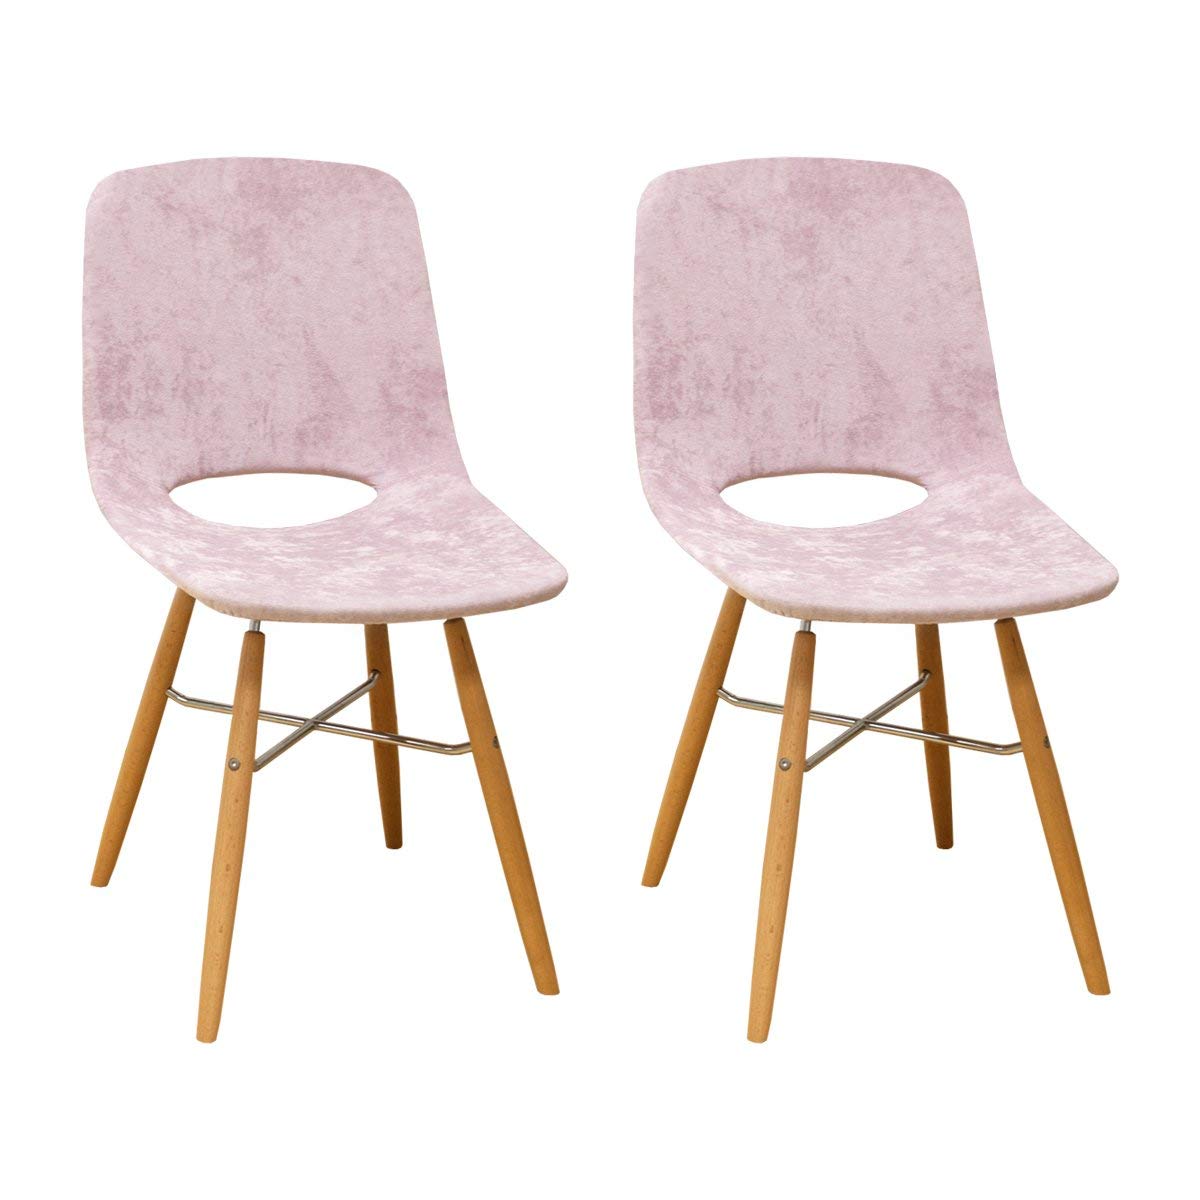 Mod Made Mm-sw10003-pink Morza Armless Chair (set Of 2)